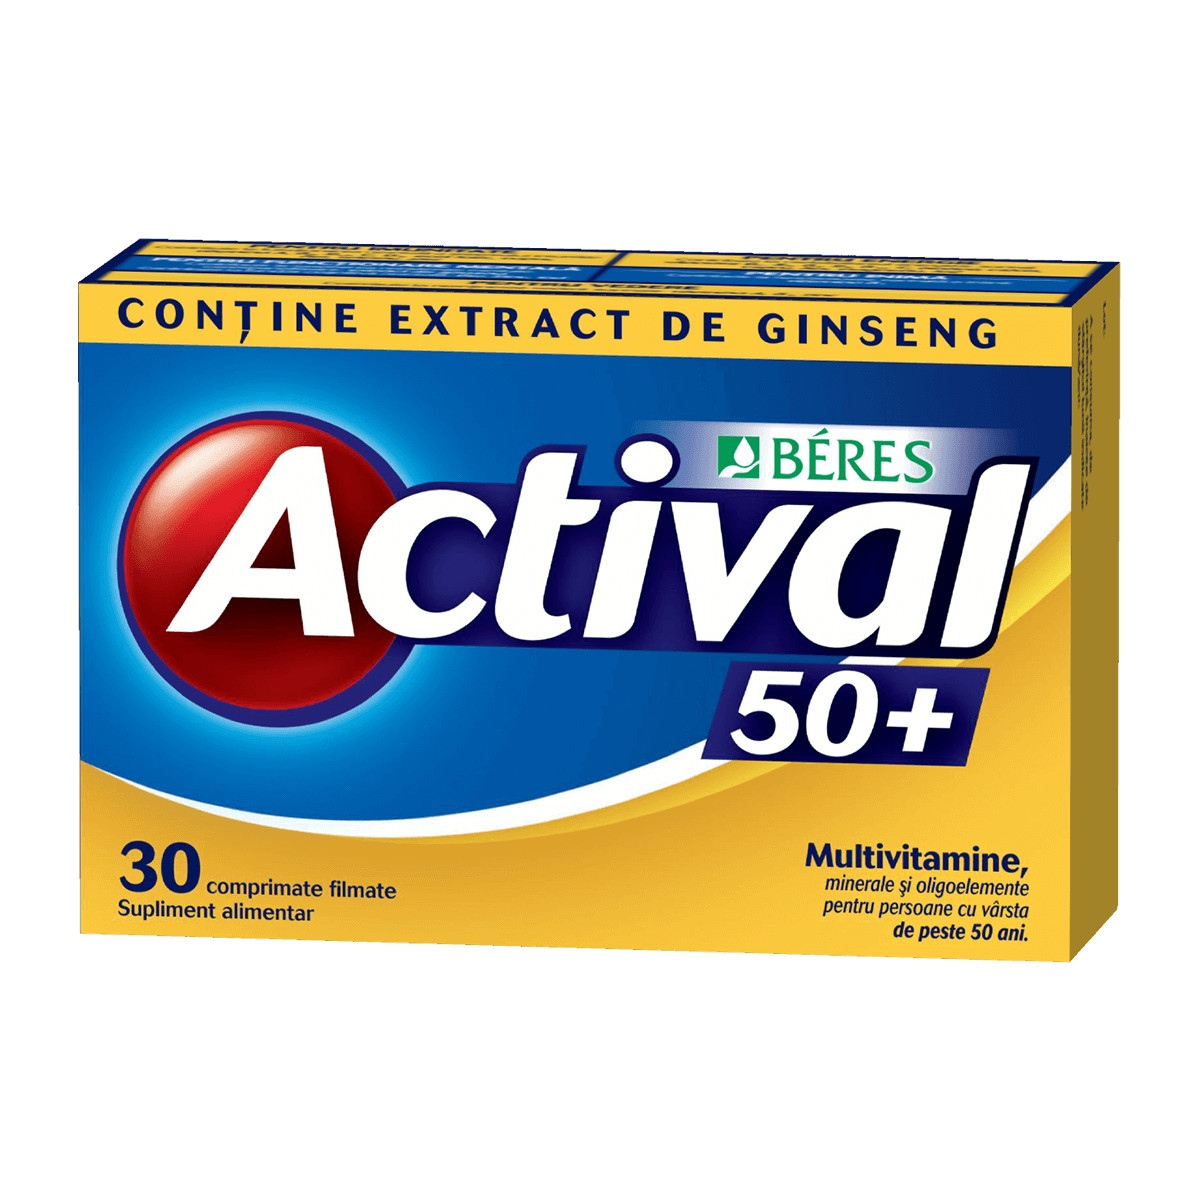 Actival 50+ cu ginseng - 30 cpr